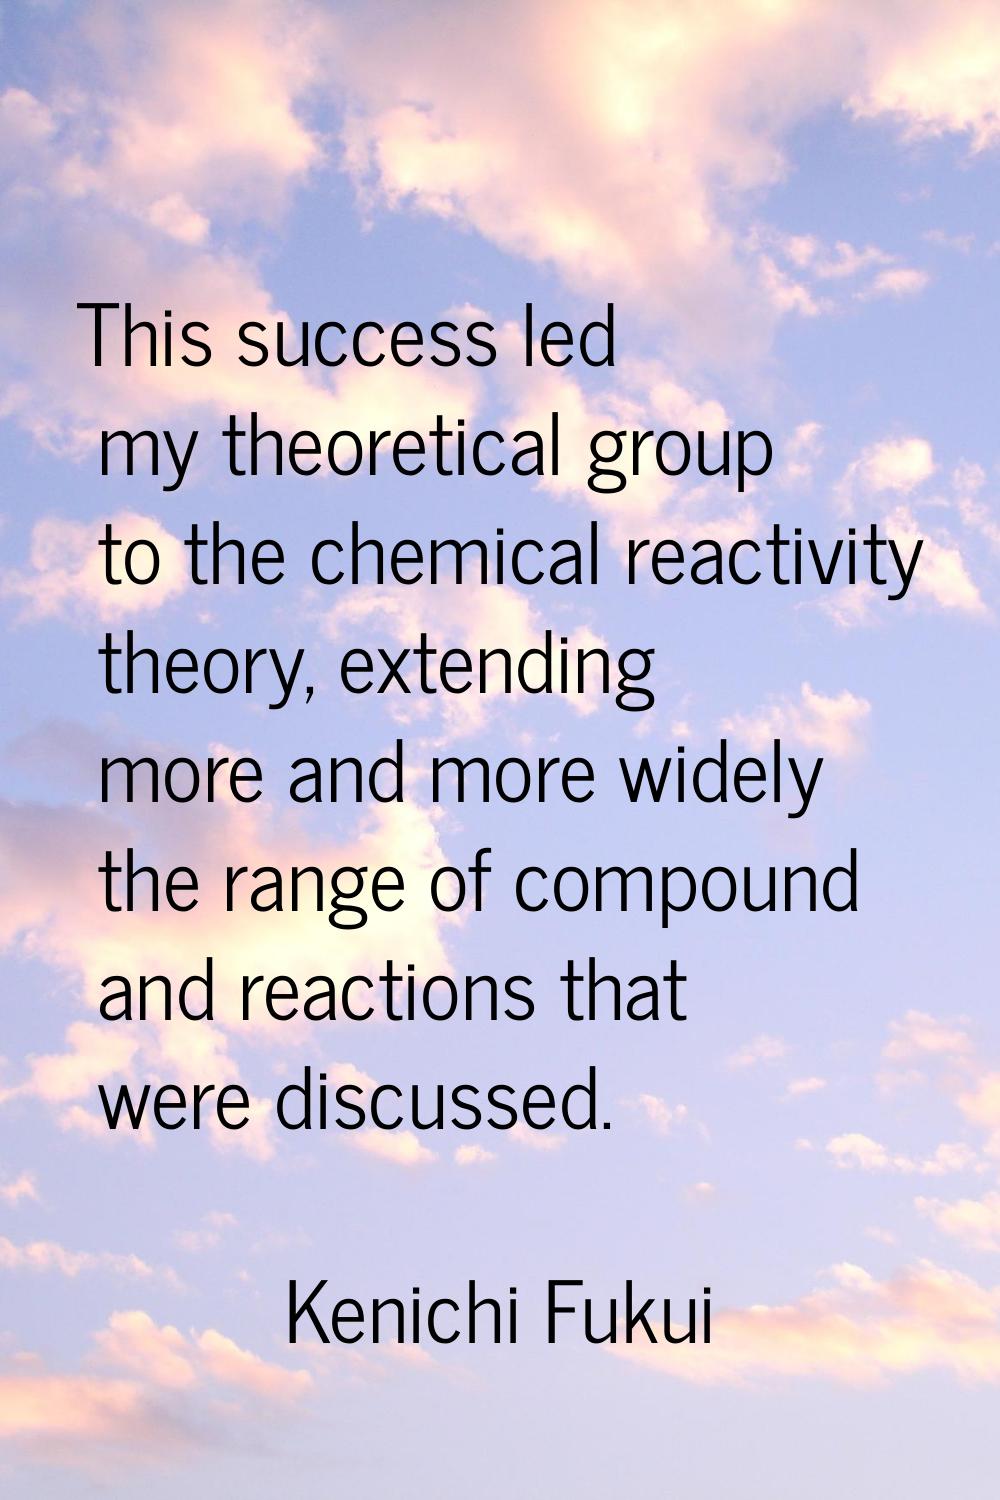 This success led my theoretical group to the chemical reactivity theory, extending more and more wi